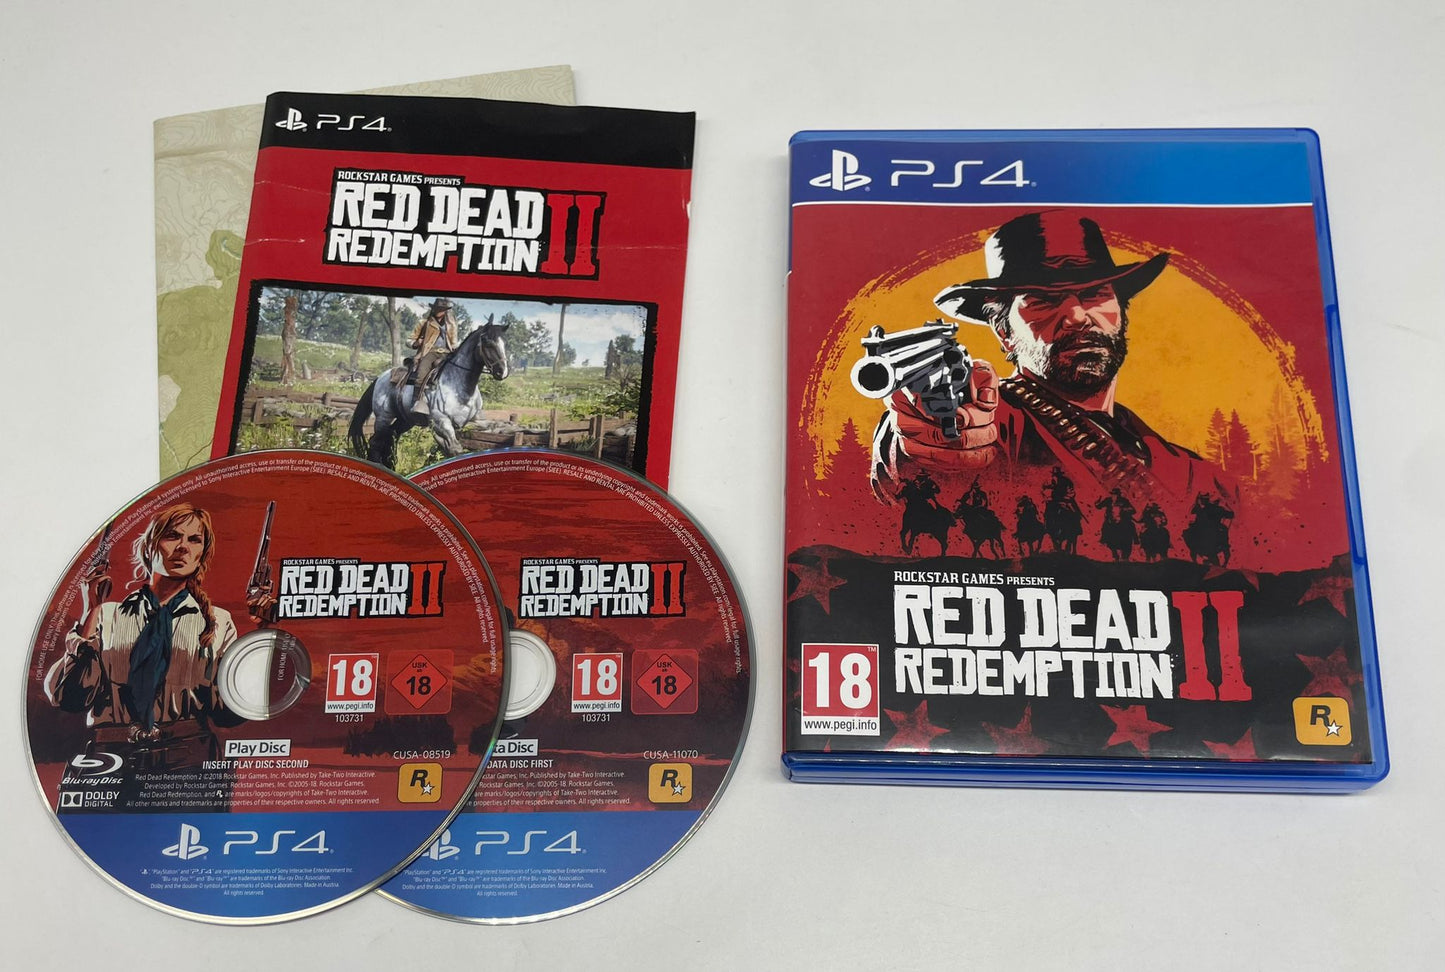 Red Dead Redemption II OVP